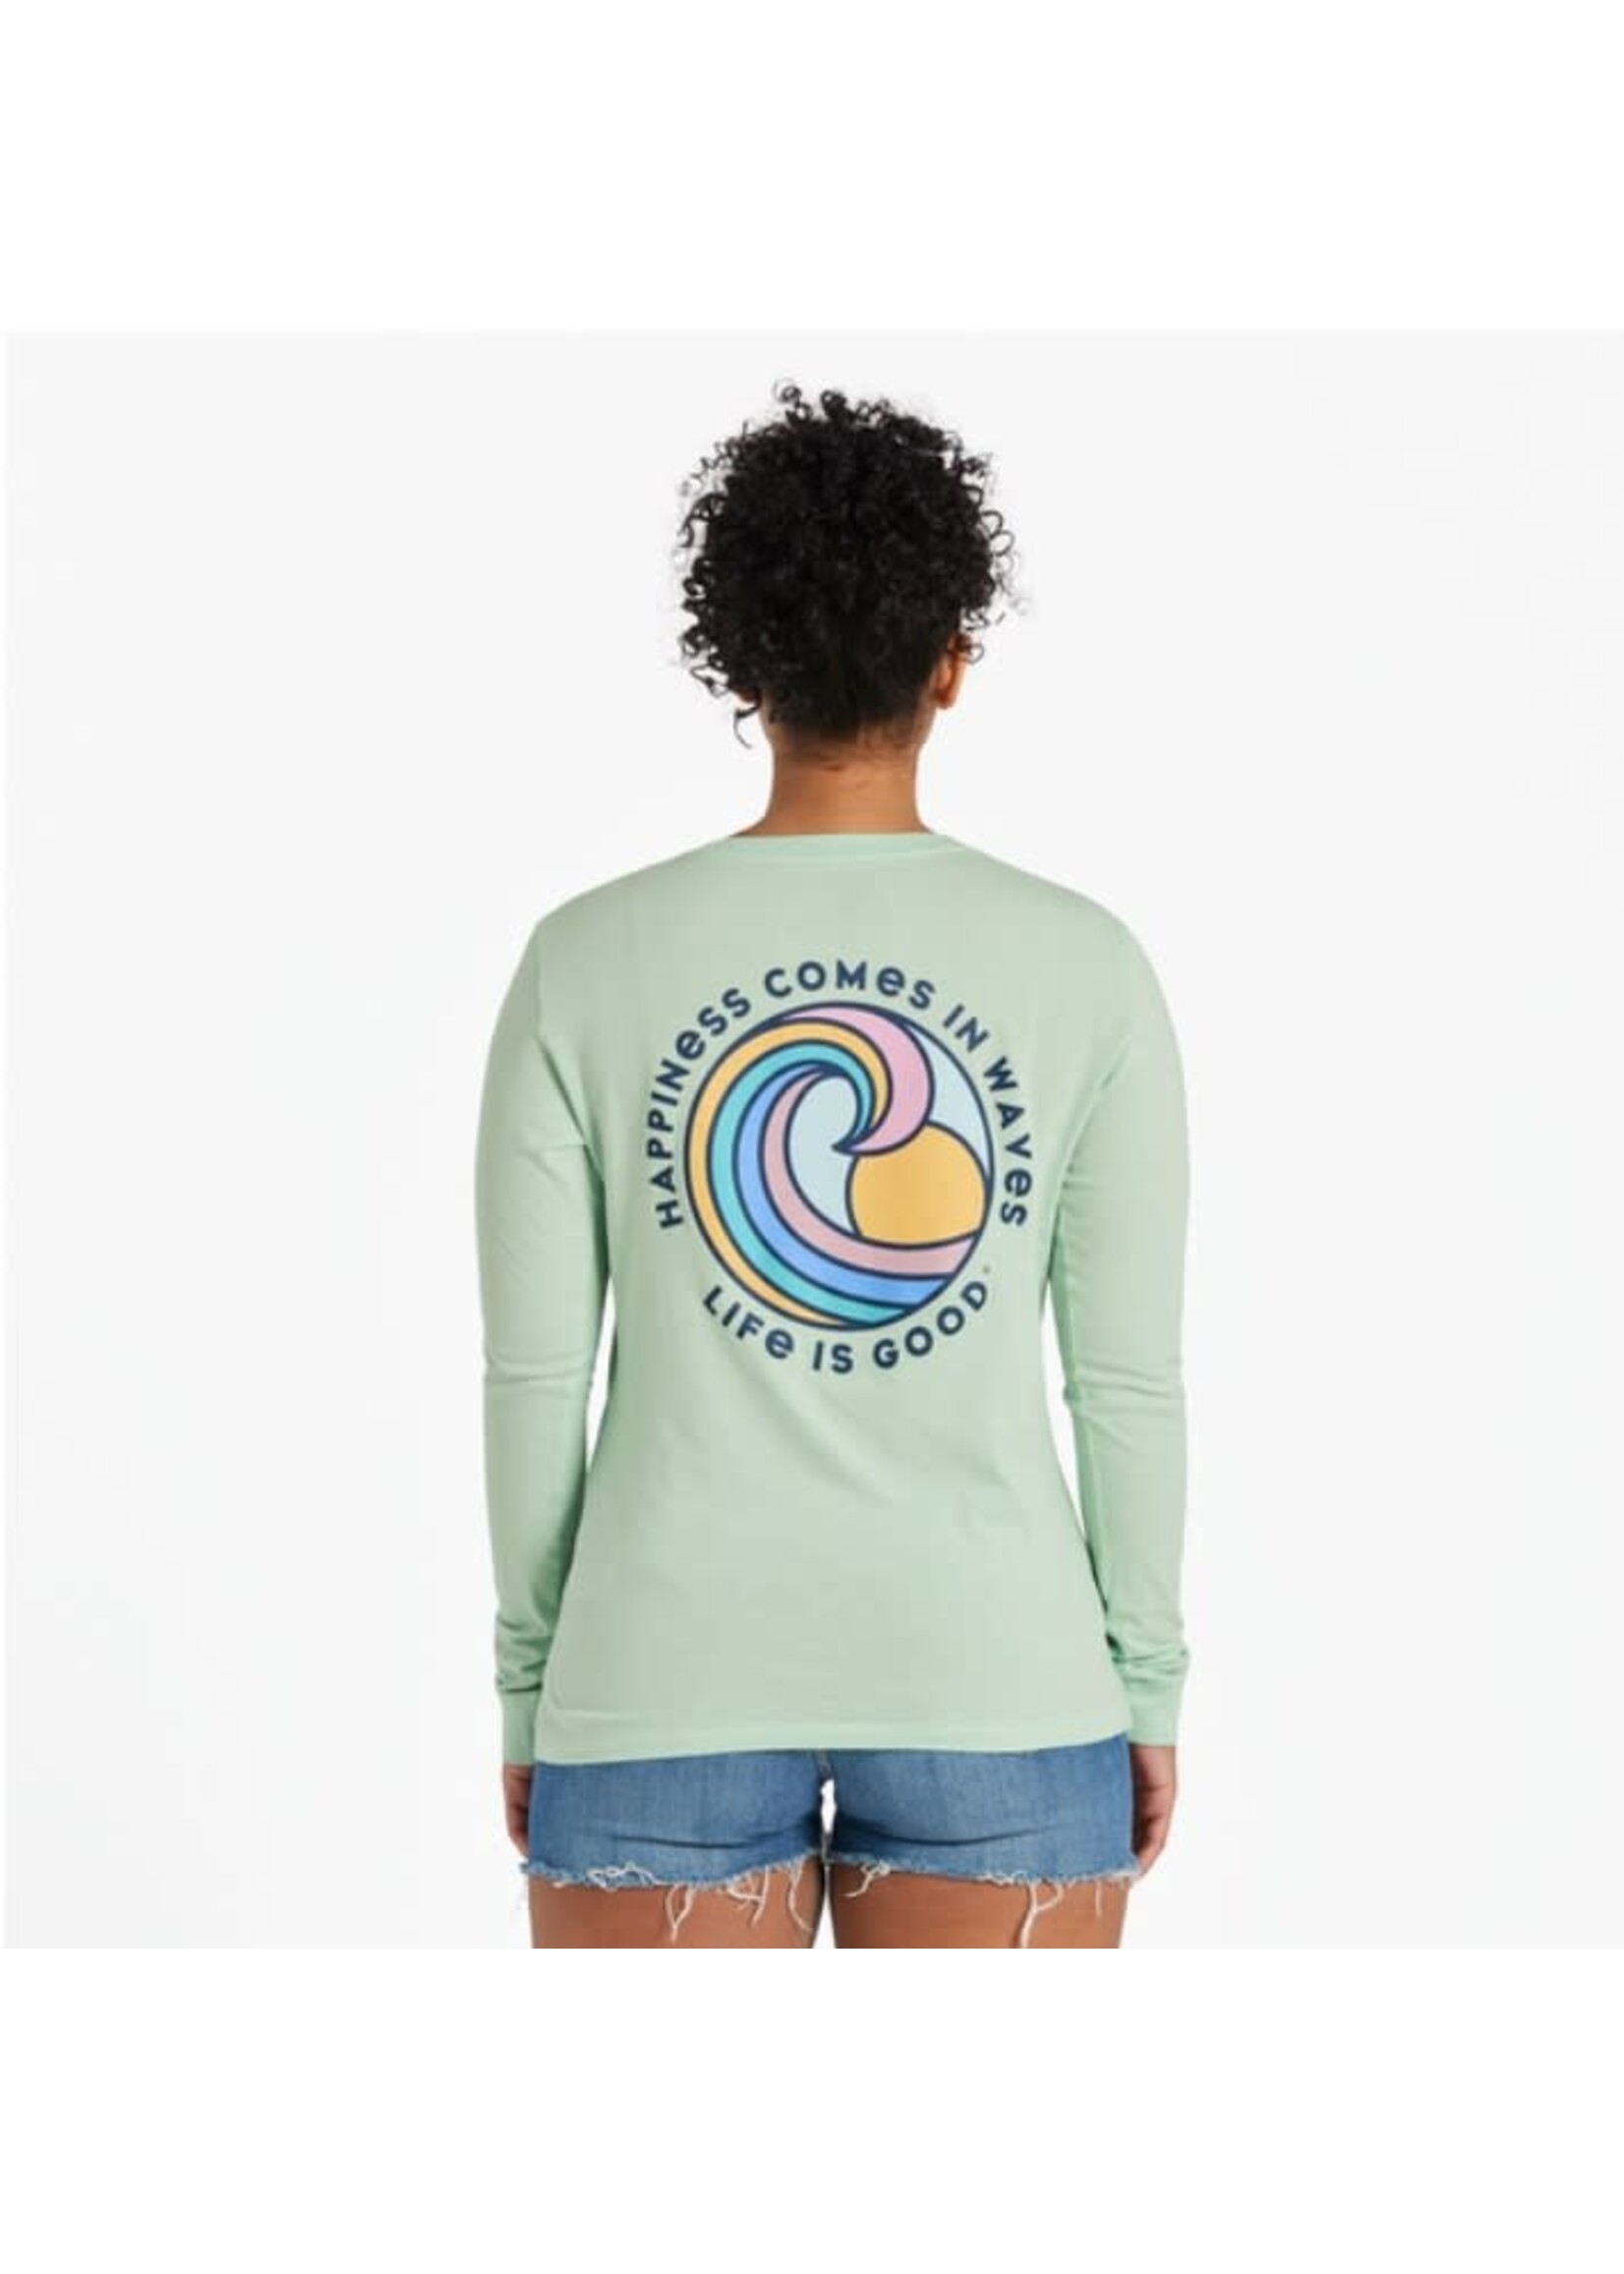 life is good Women's Long Sleeve Tee Happiness in Waves